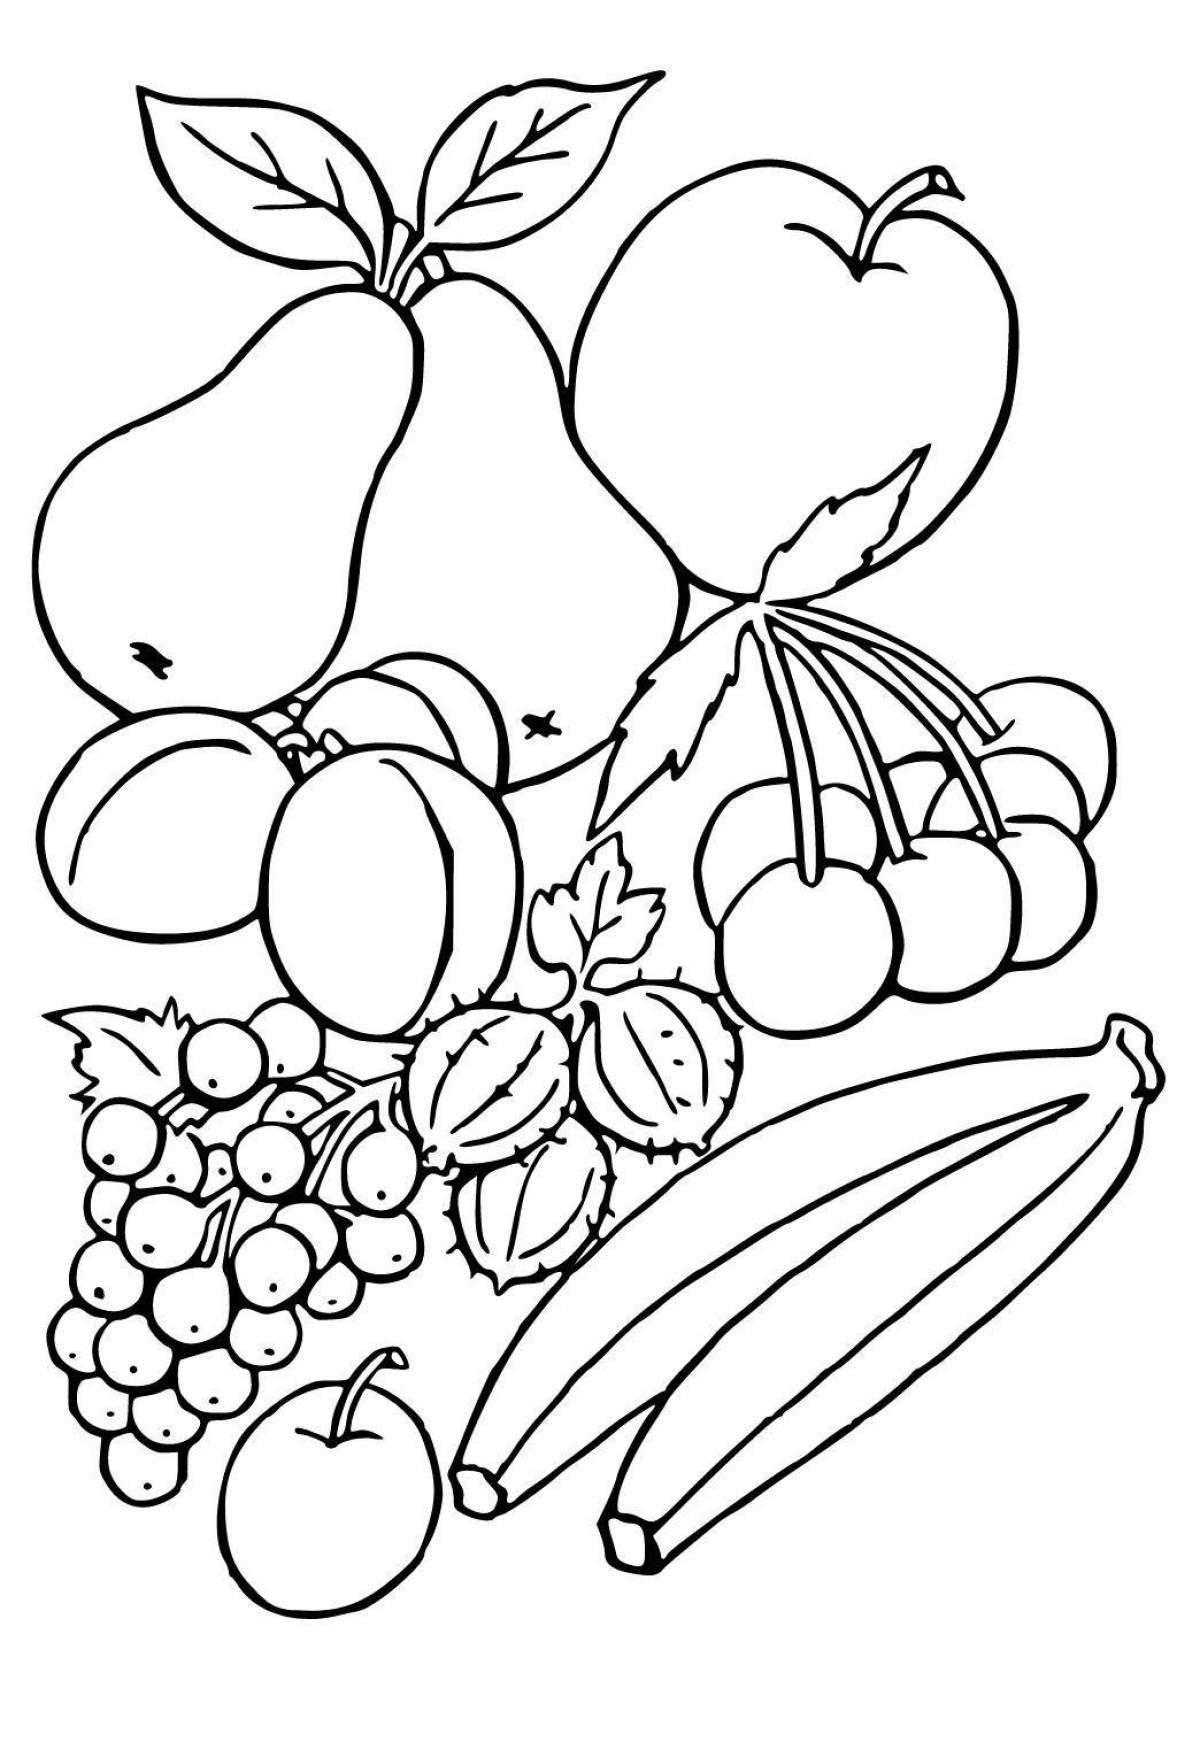 Coloring juicy berries and fruits